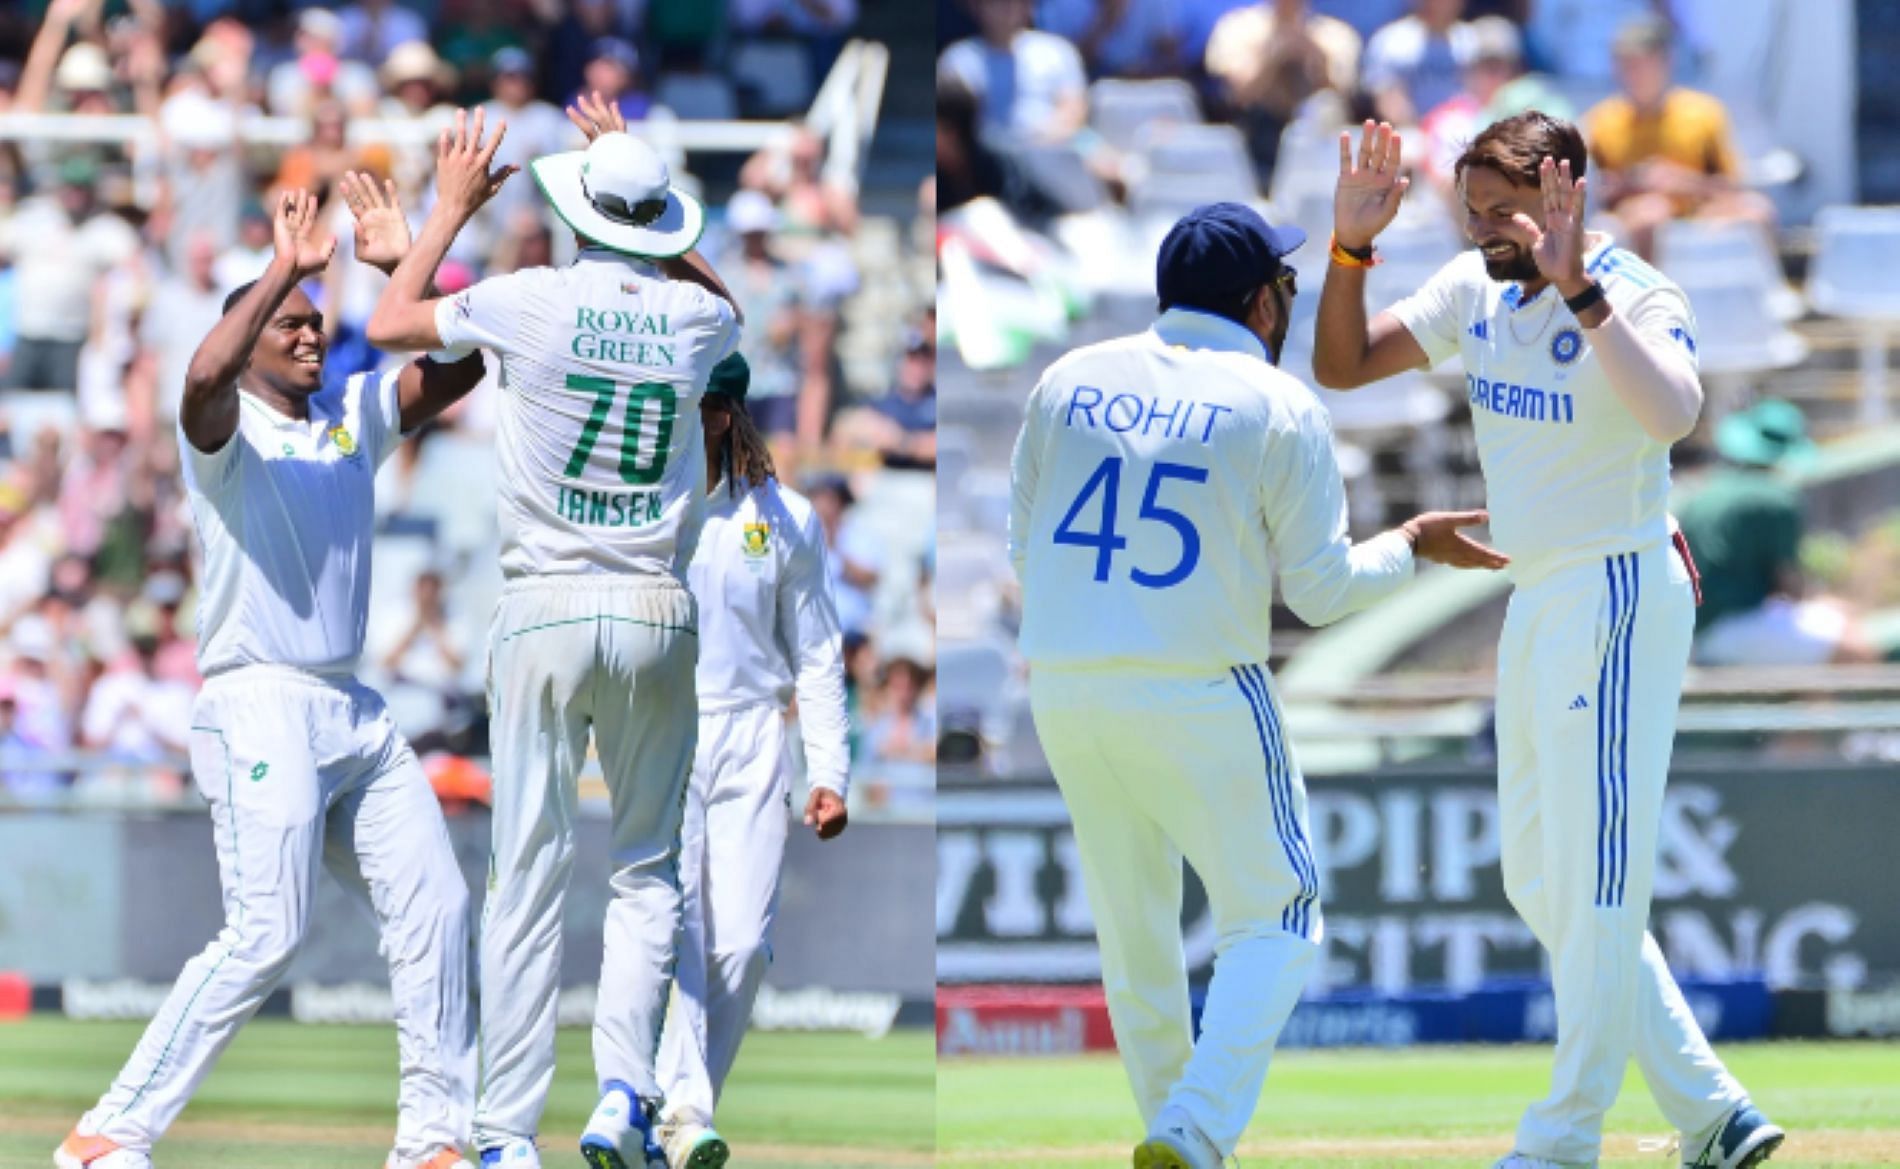 The Cape Town Test is on a knife edge heading into Day 2